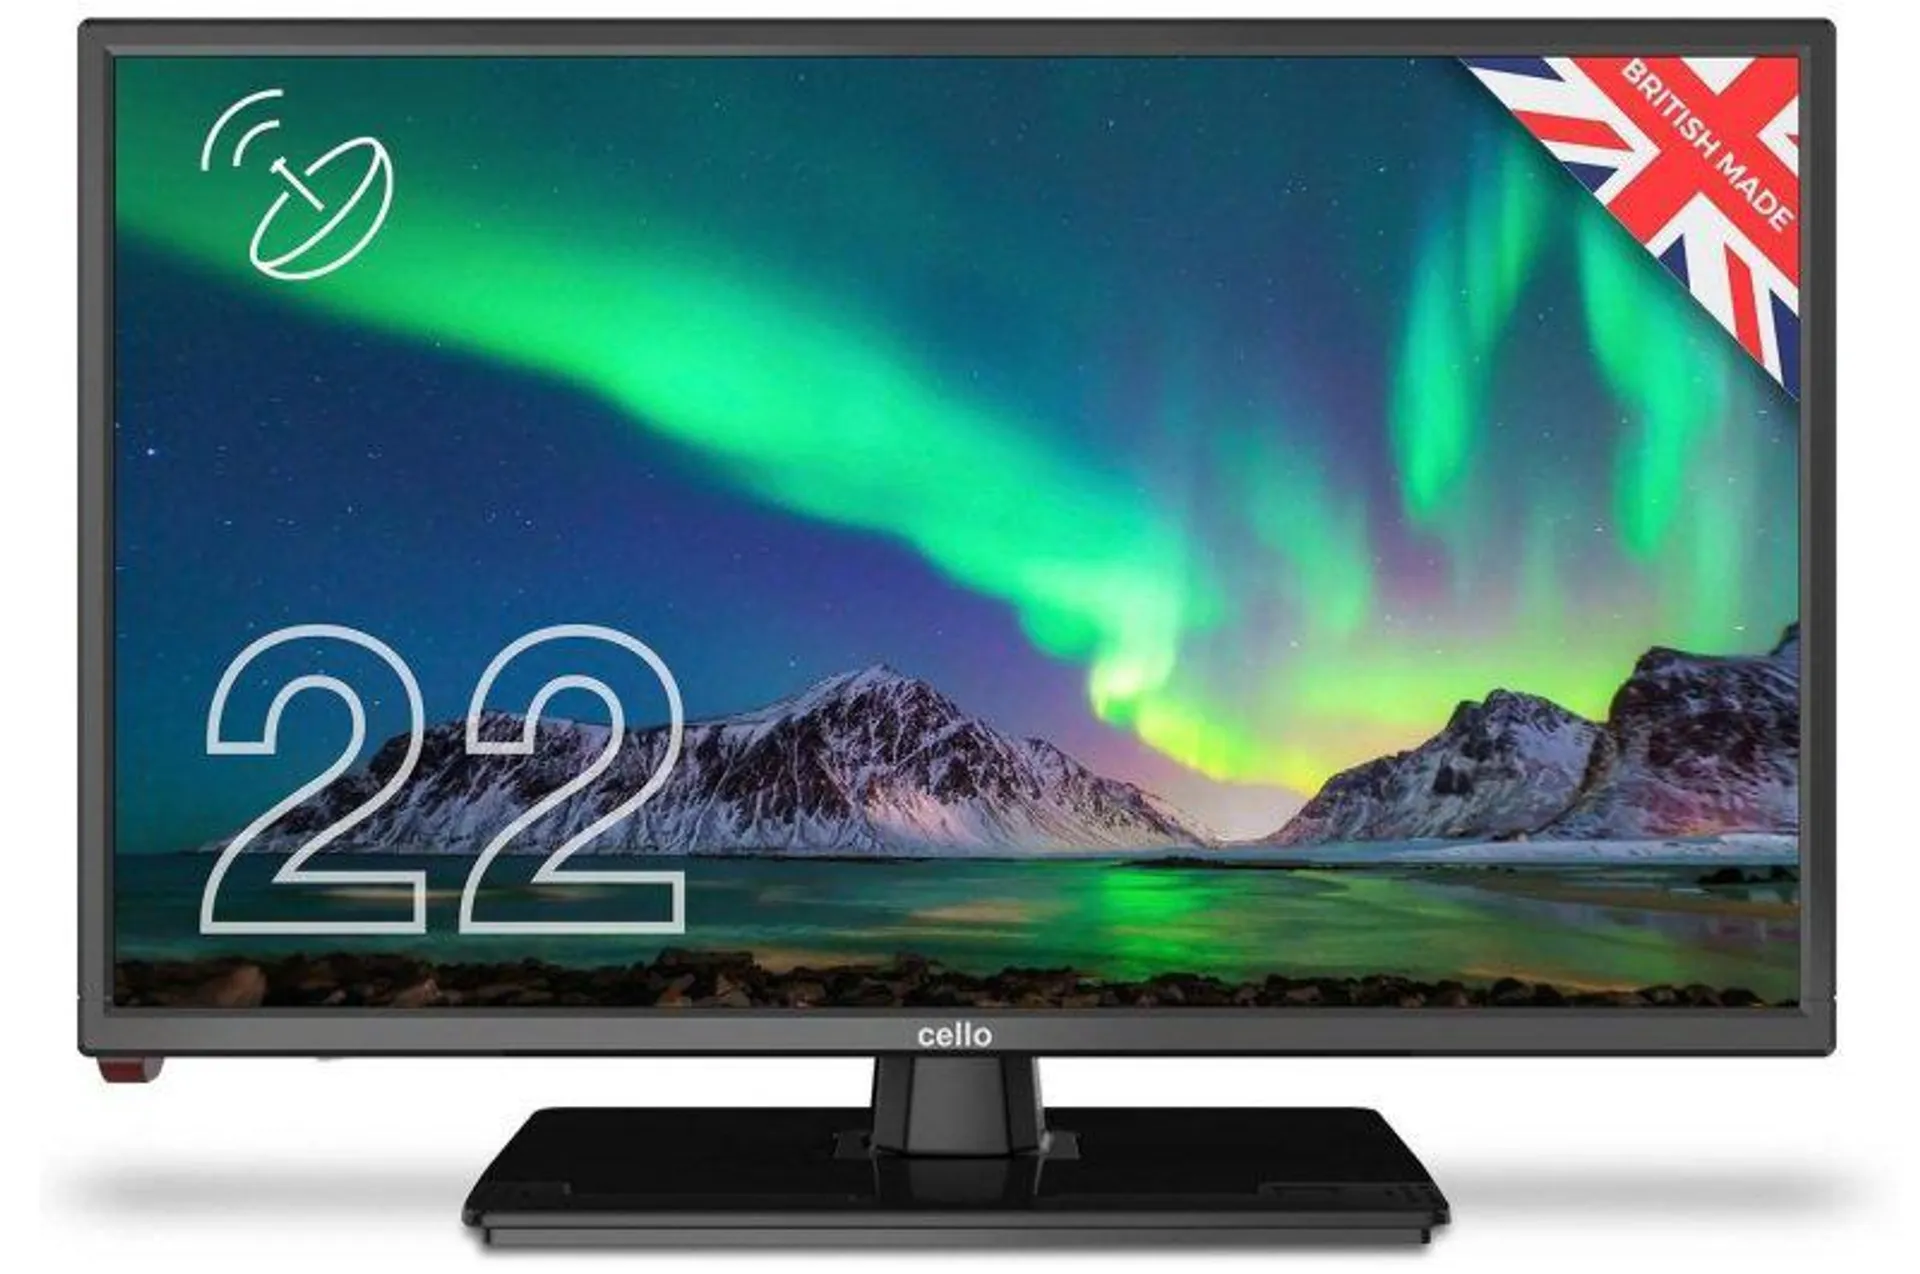 Cello C2220S 22" Full HD TV with Freeview HD & Satellite Tuner